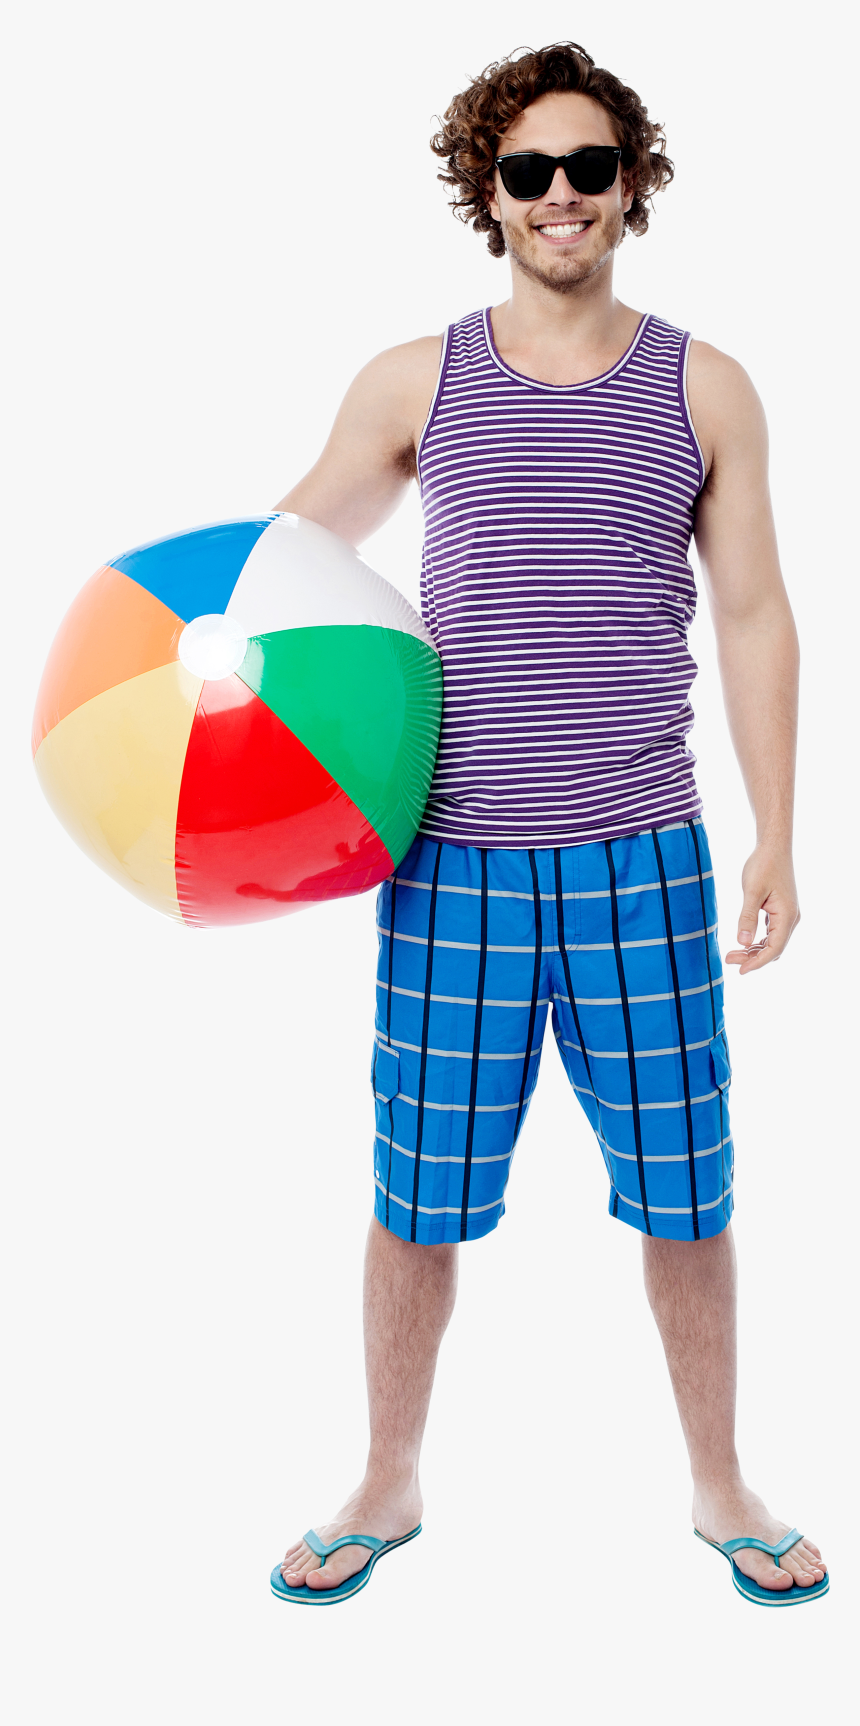 Men With Beach Ball Png Image, Transparent Png, Free Download